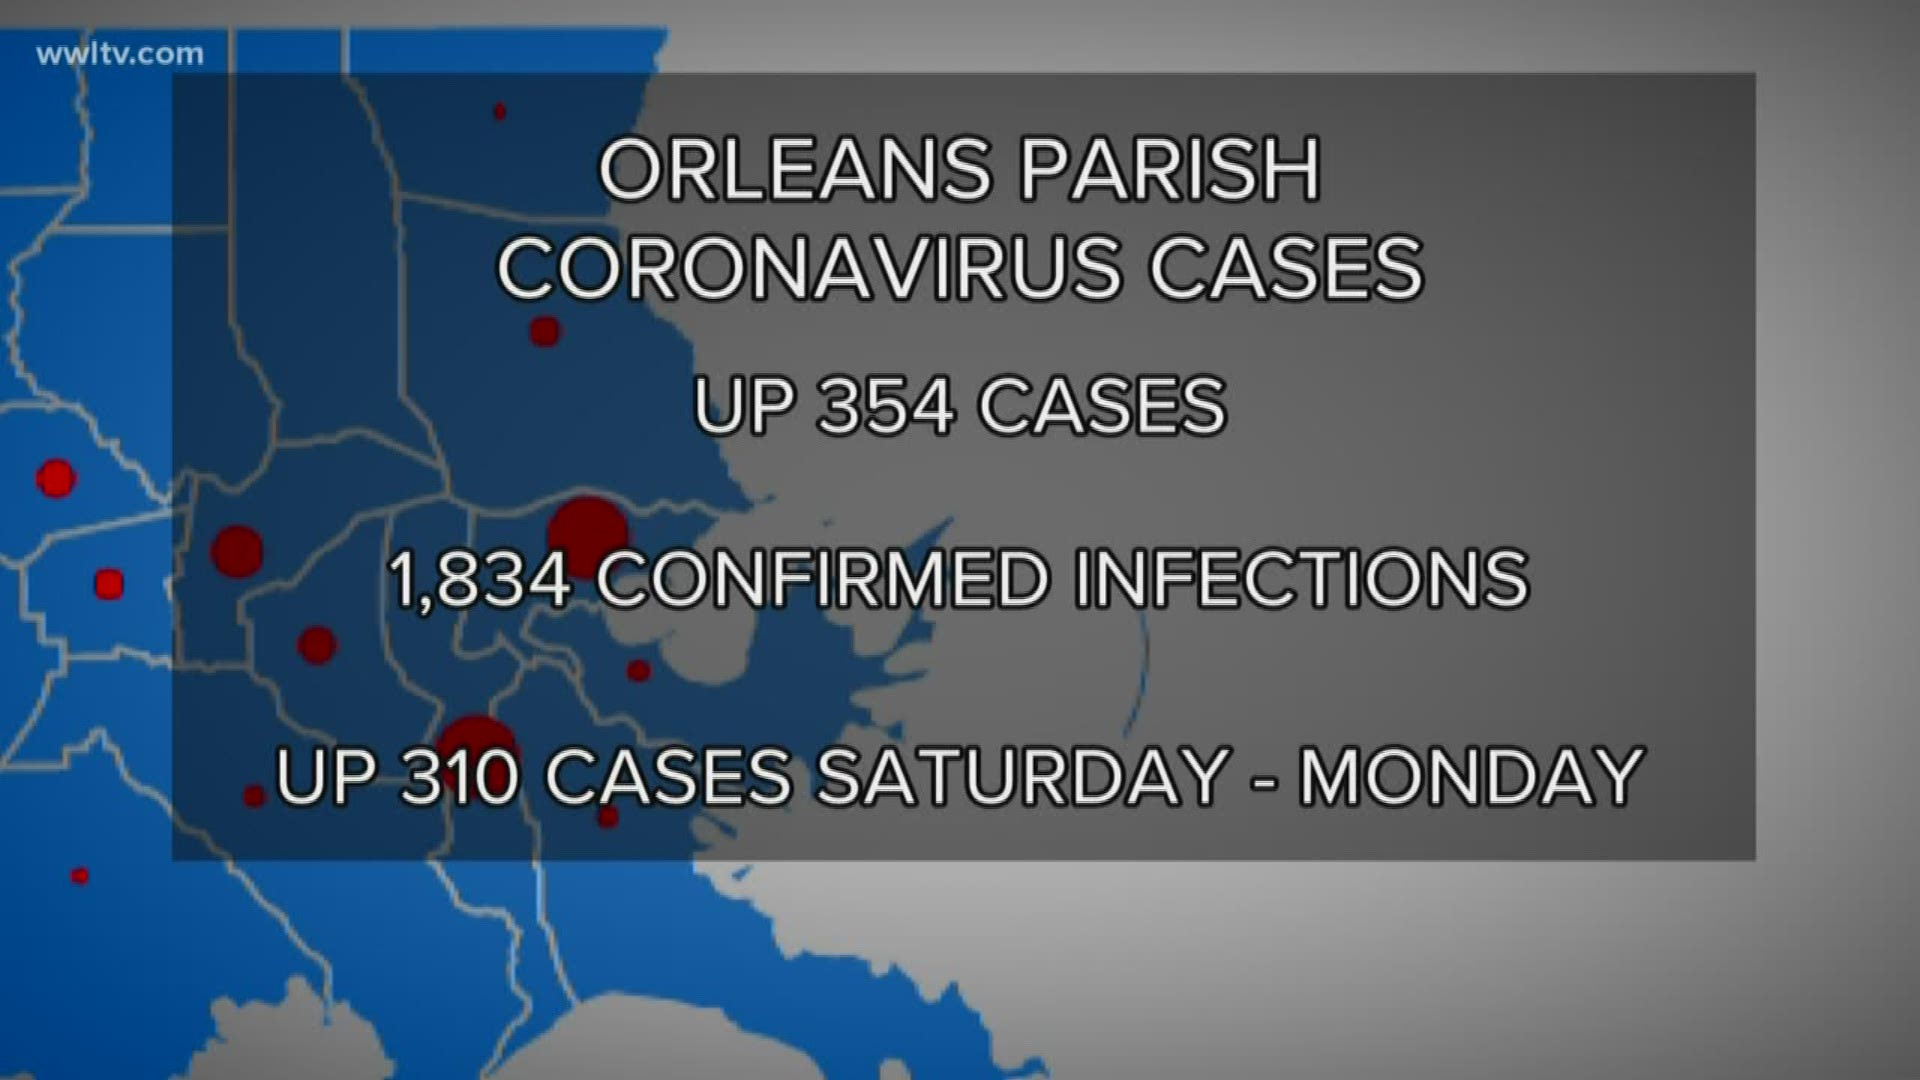 The coronavirus numbers here in New Orleans and across Louisiana are staggering. They point to a rapidly ascending trajectory in terms of new cases and deaths.